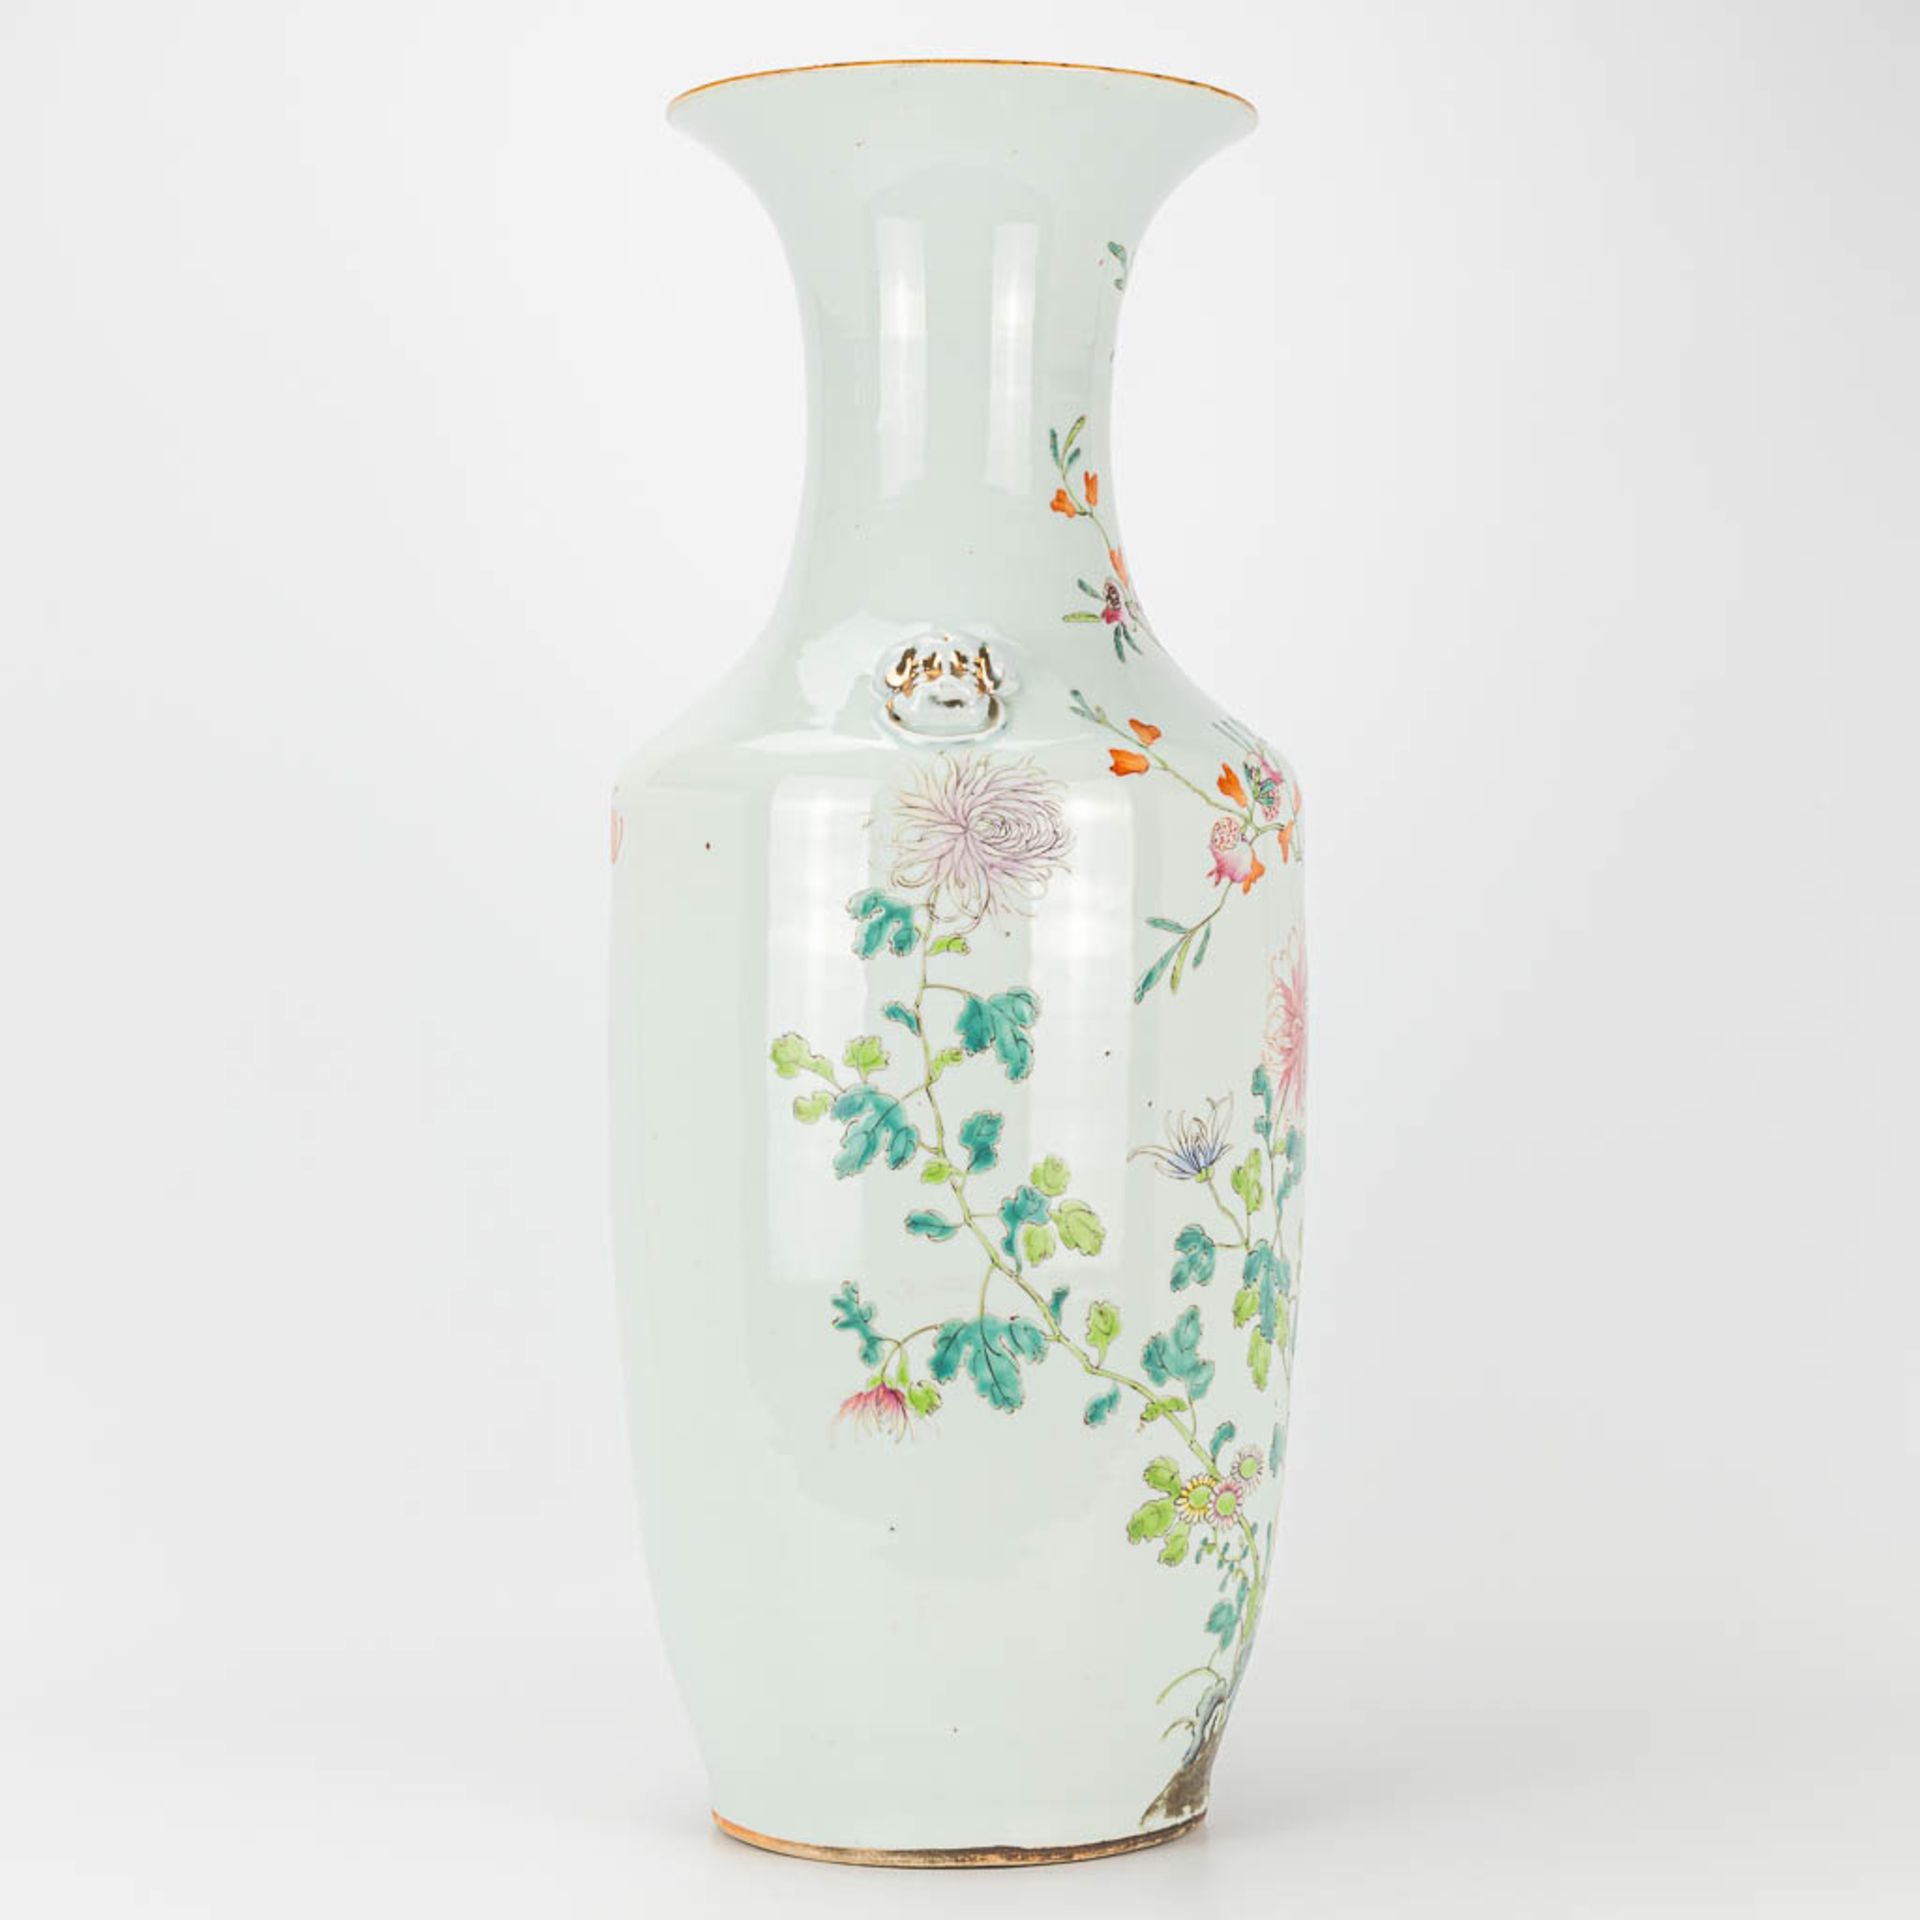 A vase made of Chinese porcelain and decorated with roses and bats. 19th century. - Image 3 of 13